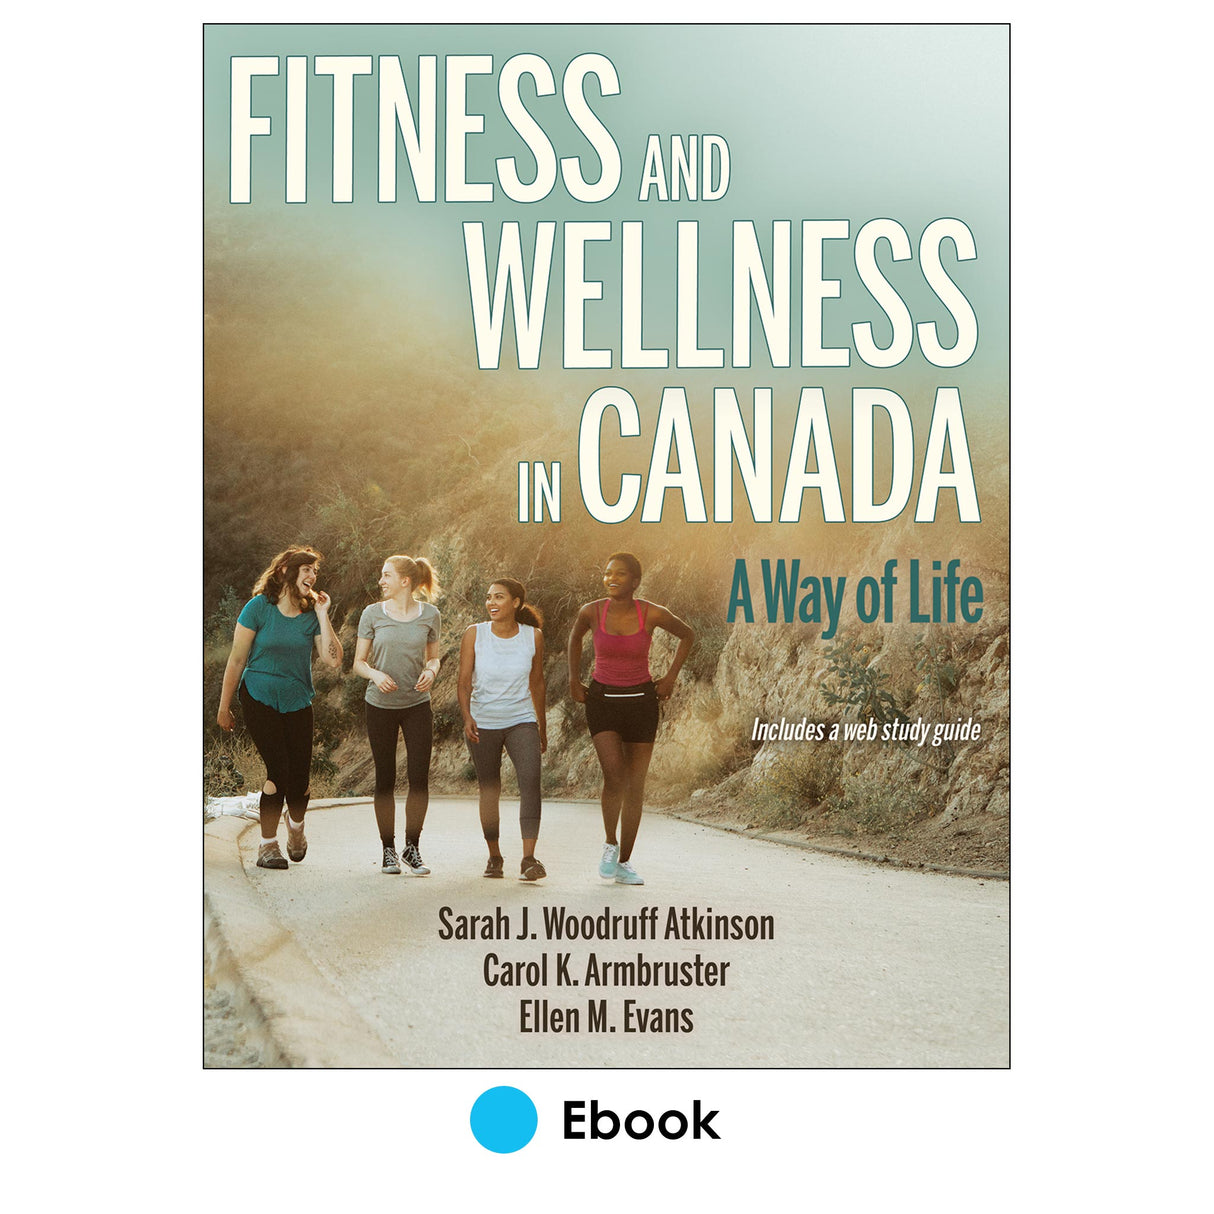 Fitness and Wellness in Canada epub With Web Study Guide